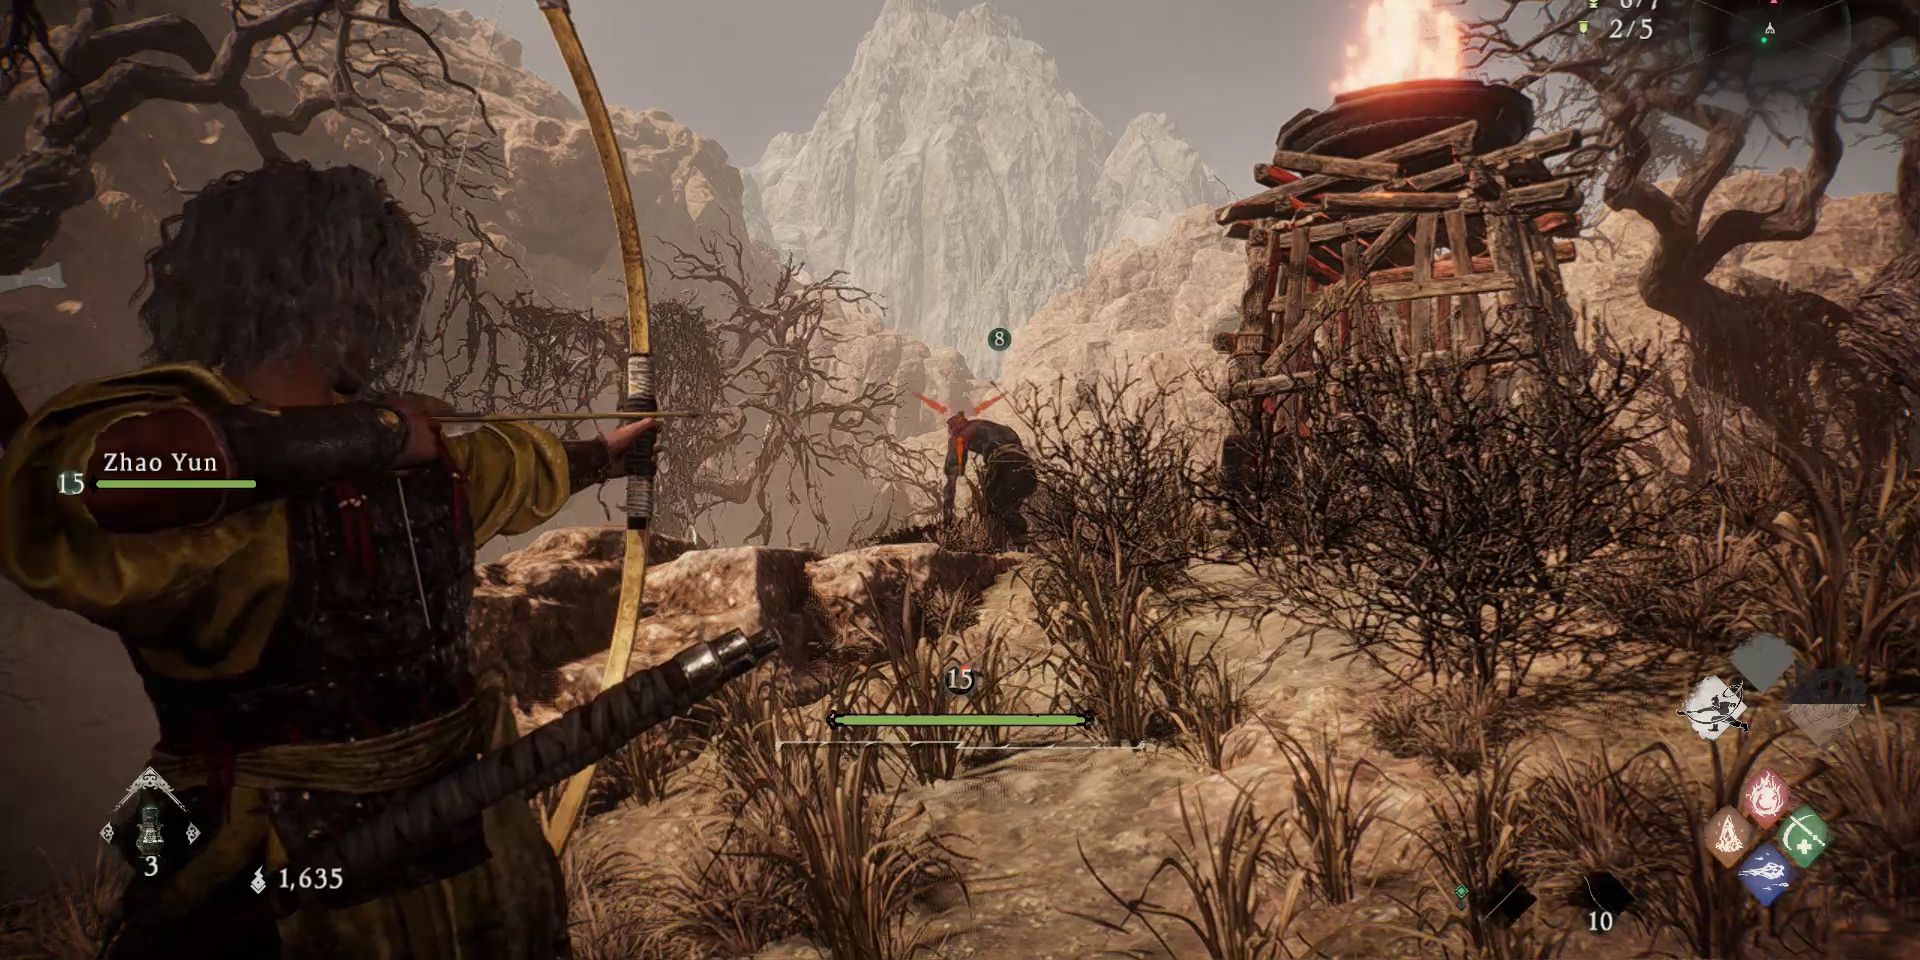 The player character aims the Bamboo Bow at a zombie enemy in Wo Long: Fallen Dynasty.